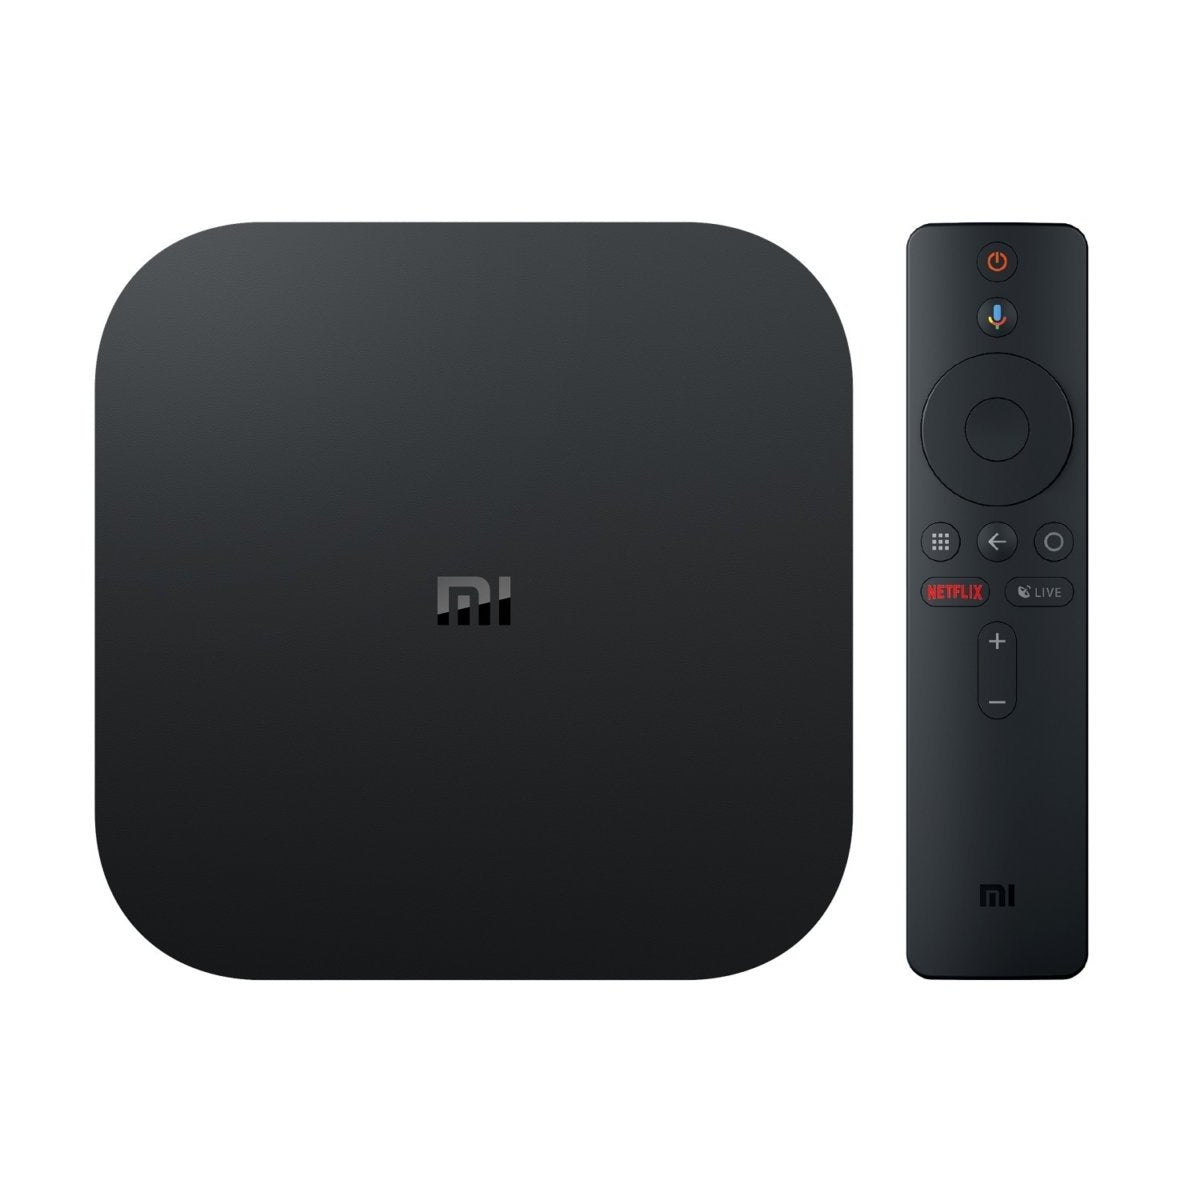 Xiaomi Mi Box S Android TV with Google Assistant Remote Streaming Media Player - Chromecast Built-in - 4K HDR - Wi-Fi - 8 GB - Black